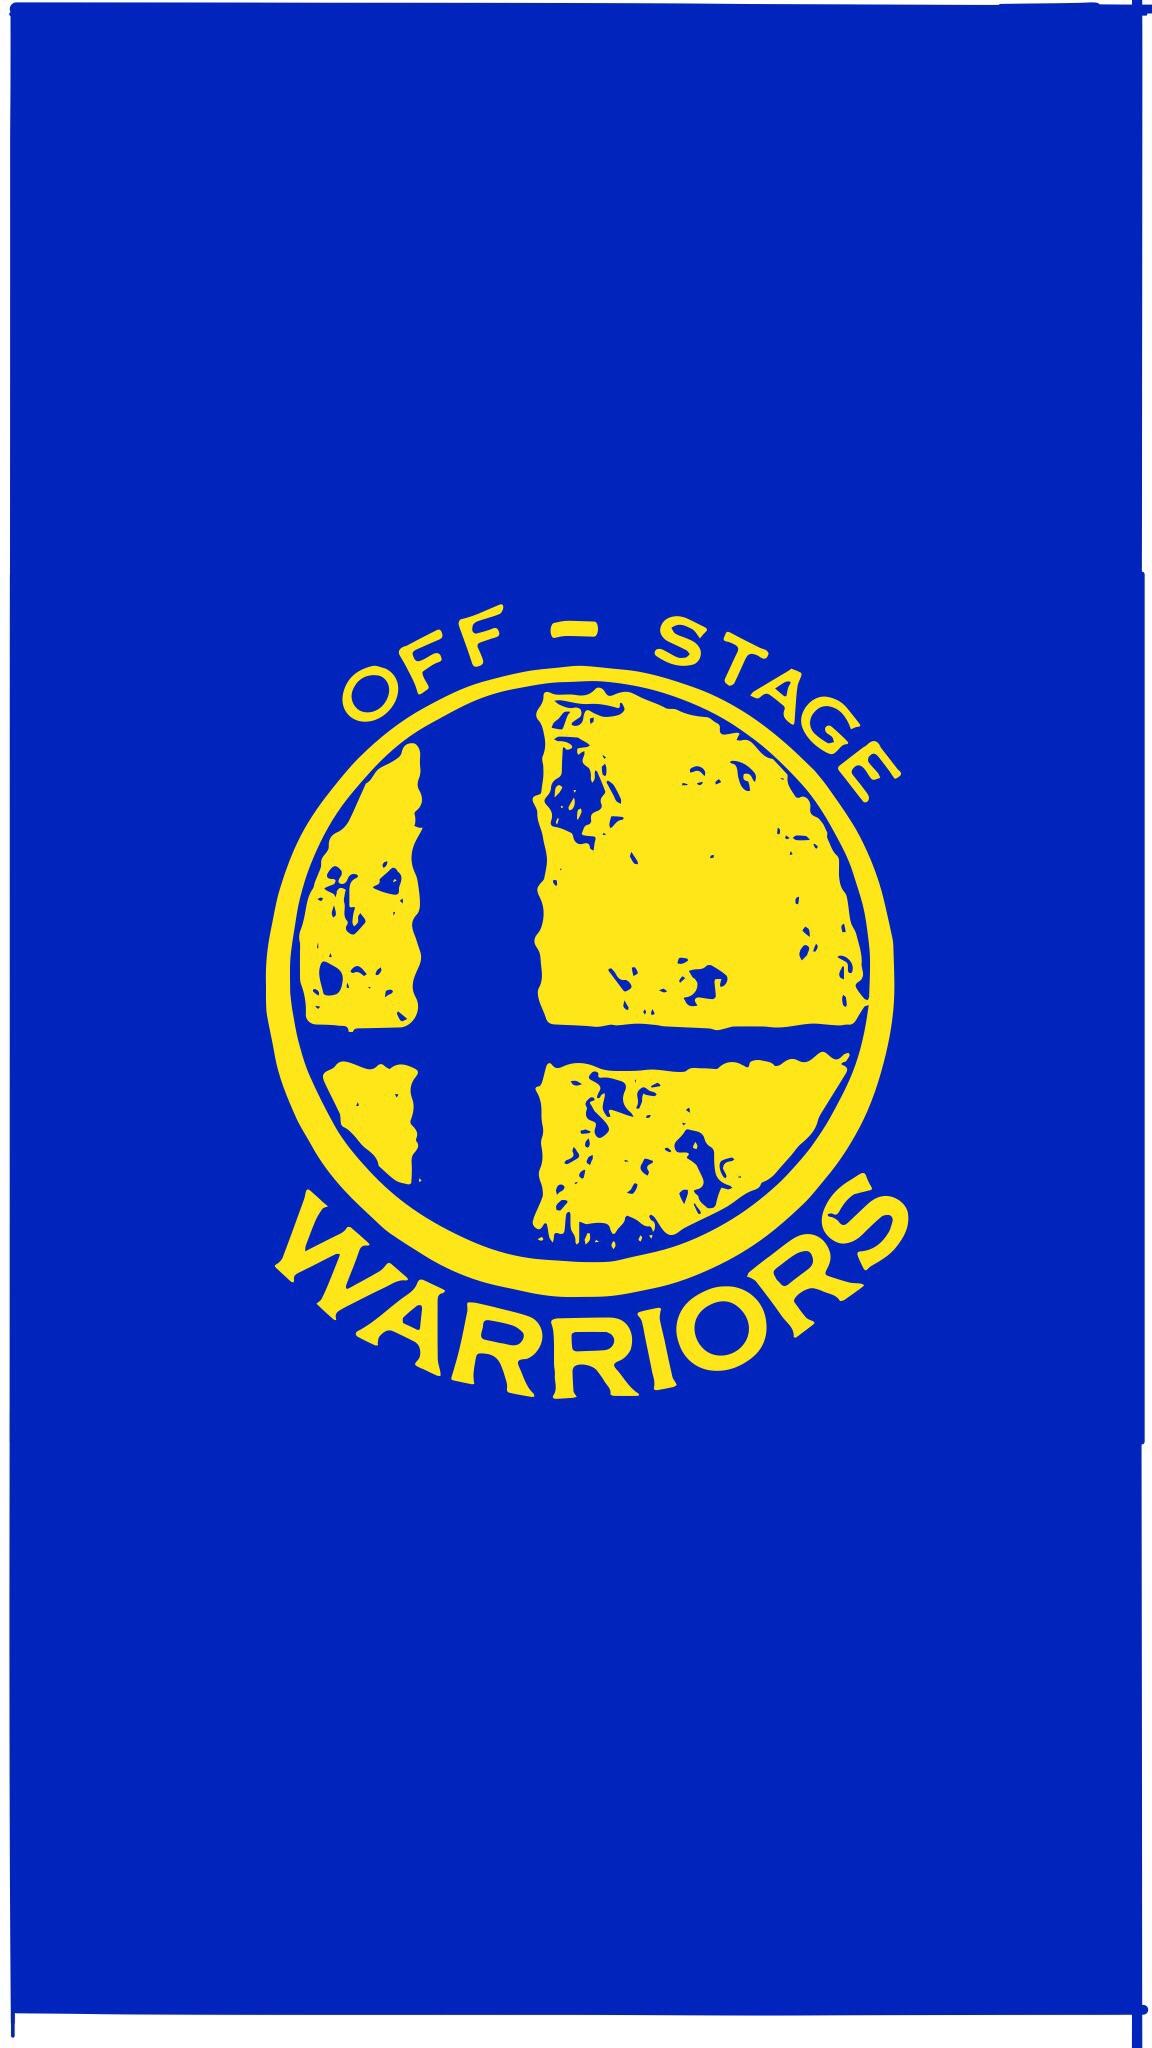 I made this iPhone wallpaper based on the Golden State warriors logo, which looks a bit like a smash ball, with Photohop